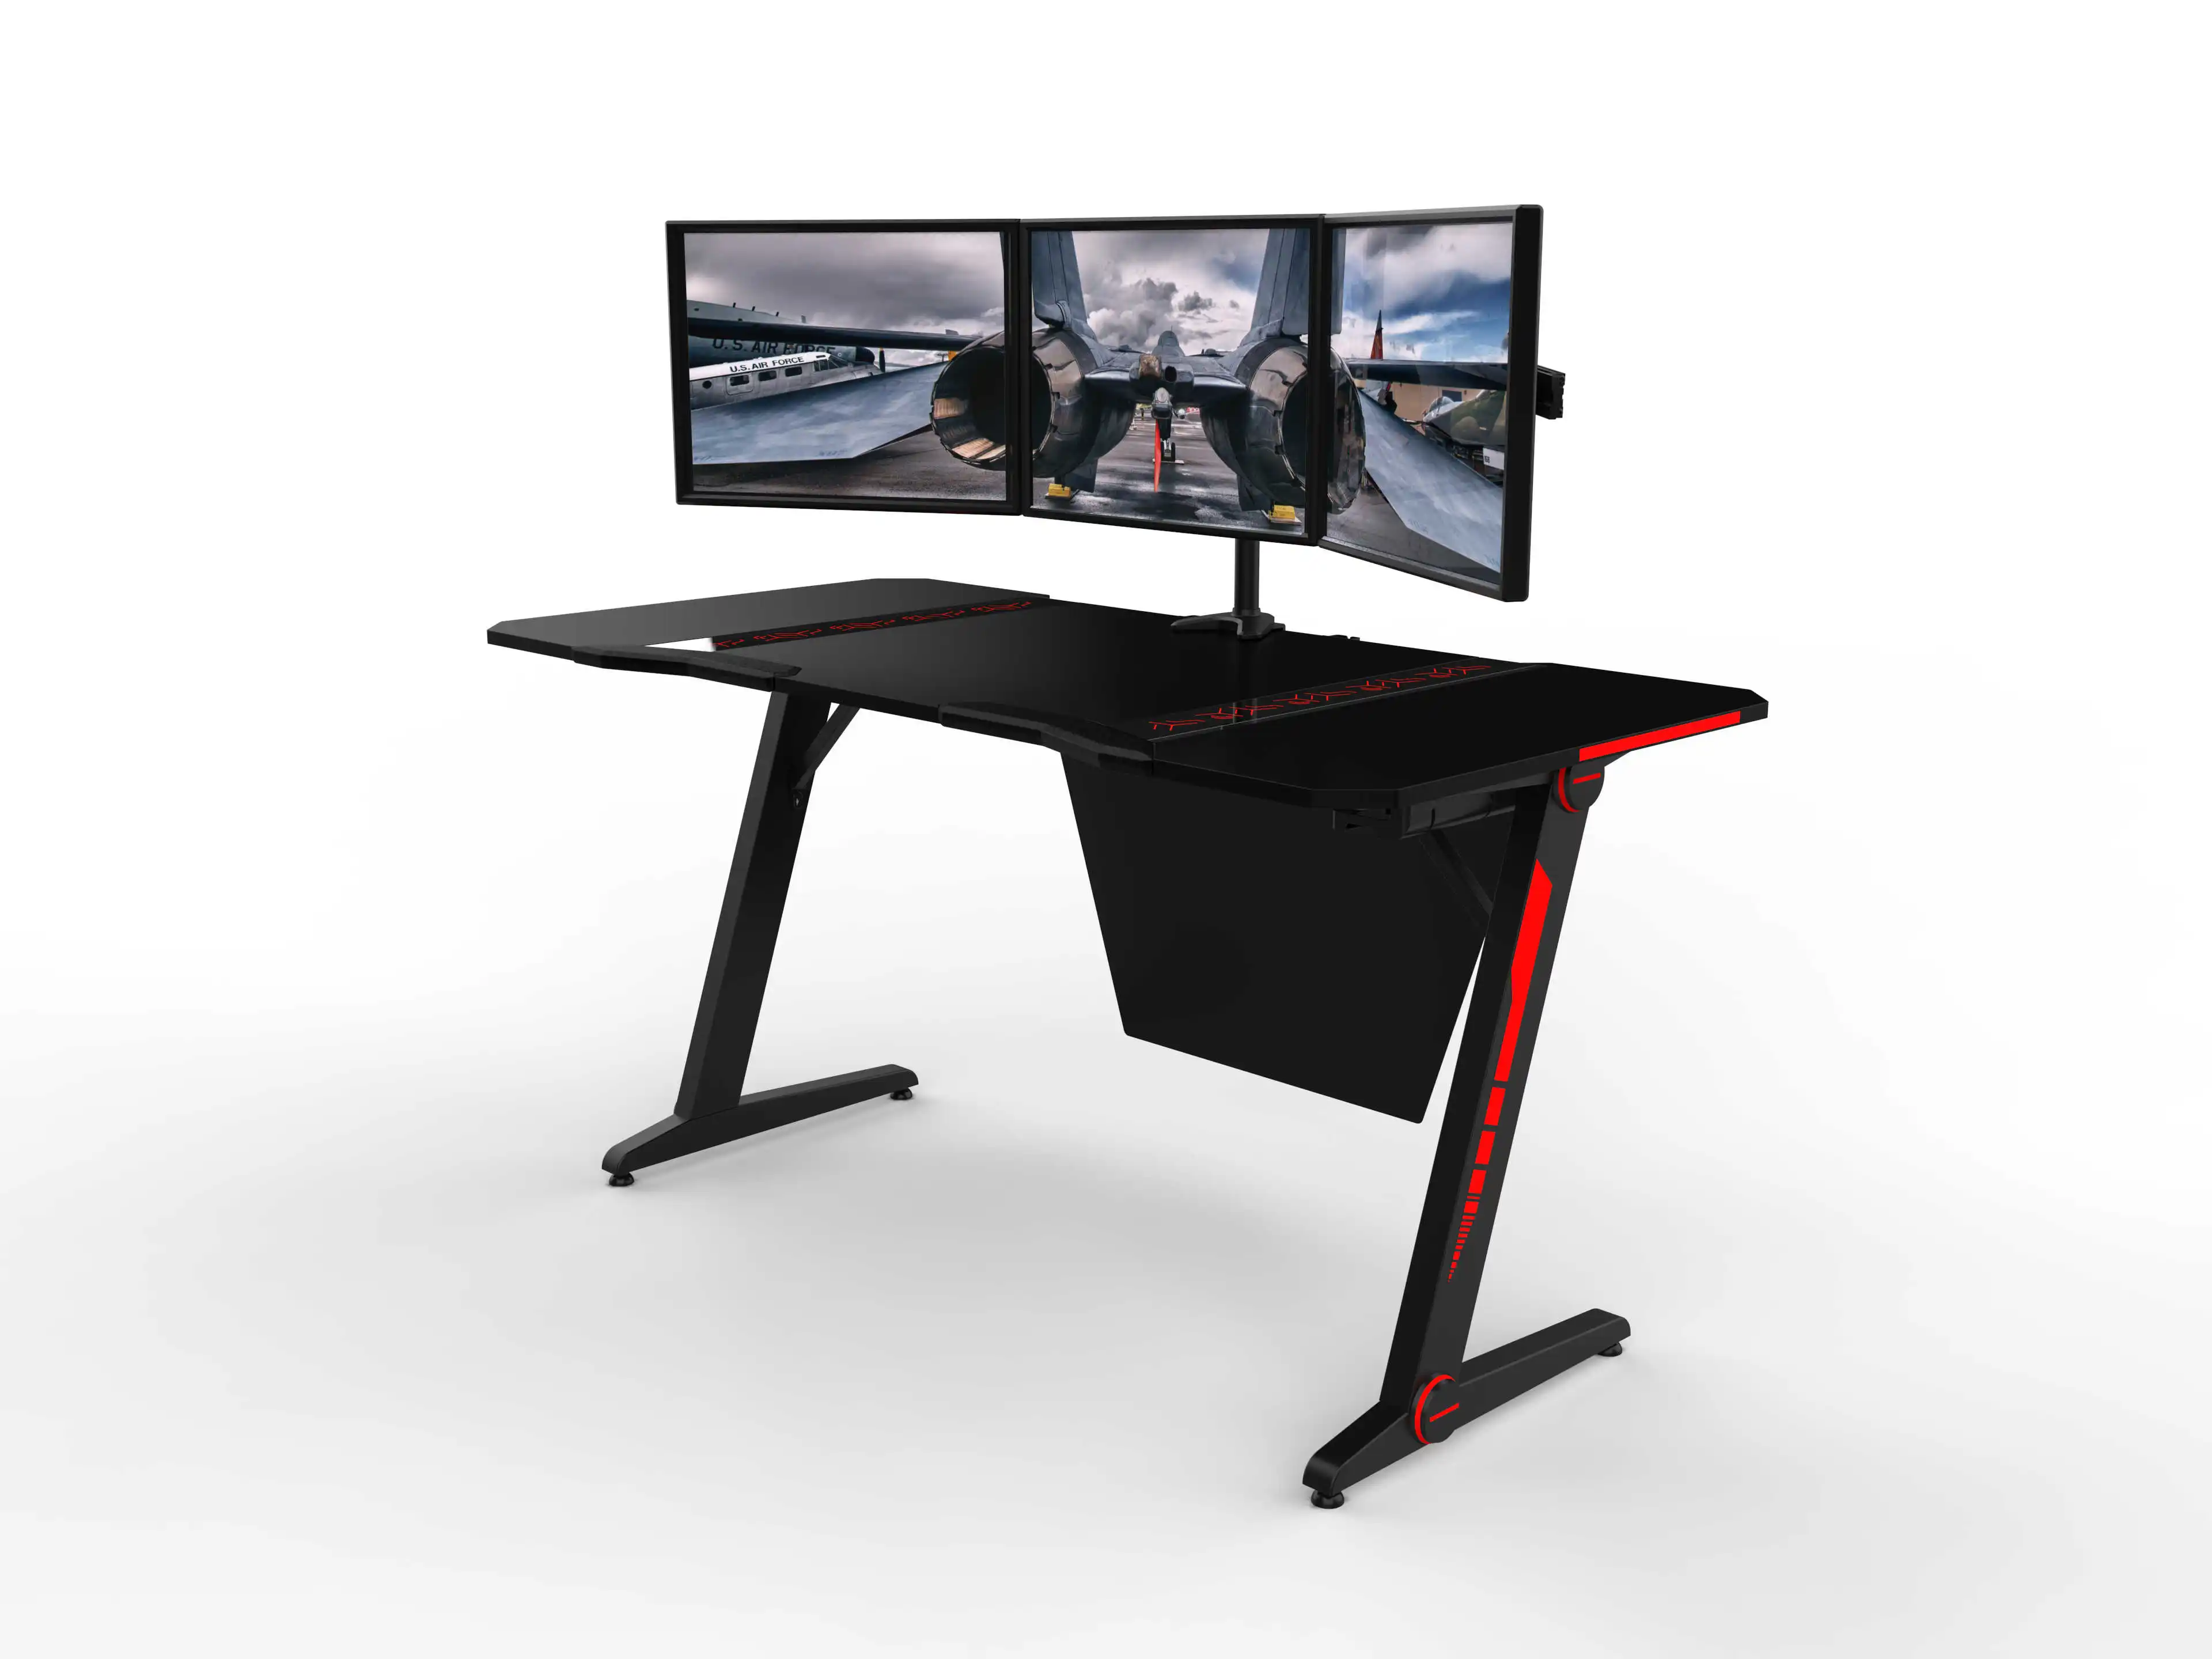 Mega LISTING Forte gamingtisch tezaur with RGB LED Computer Table gamertisch PC 